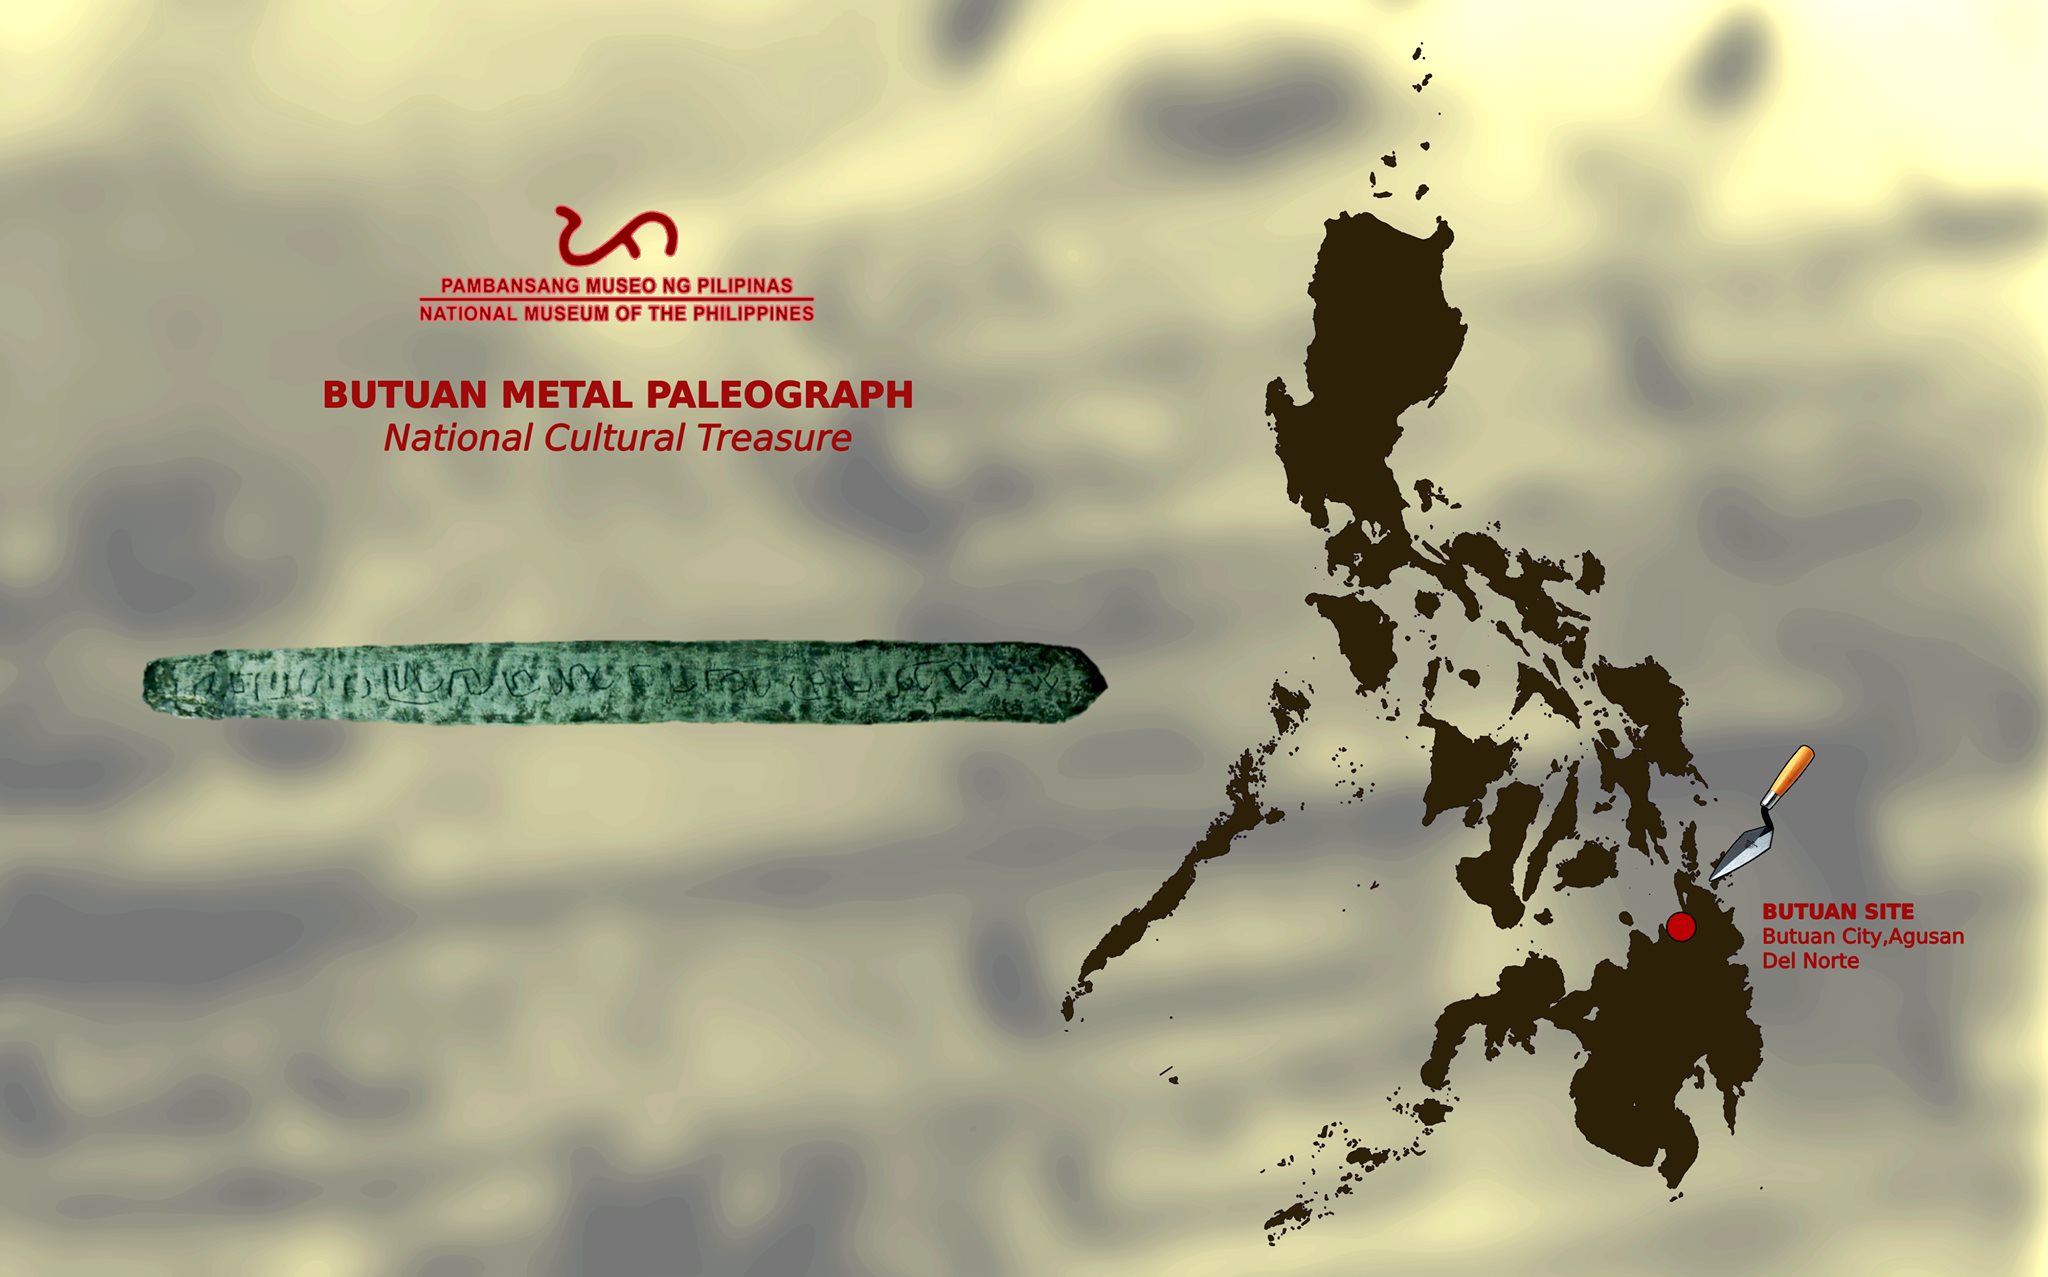 The Butuan Metal Paleograph - Evidences of Prehistoric Writing Systems in the Philippines